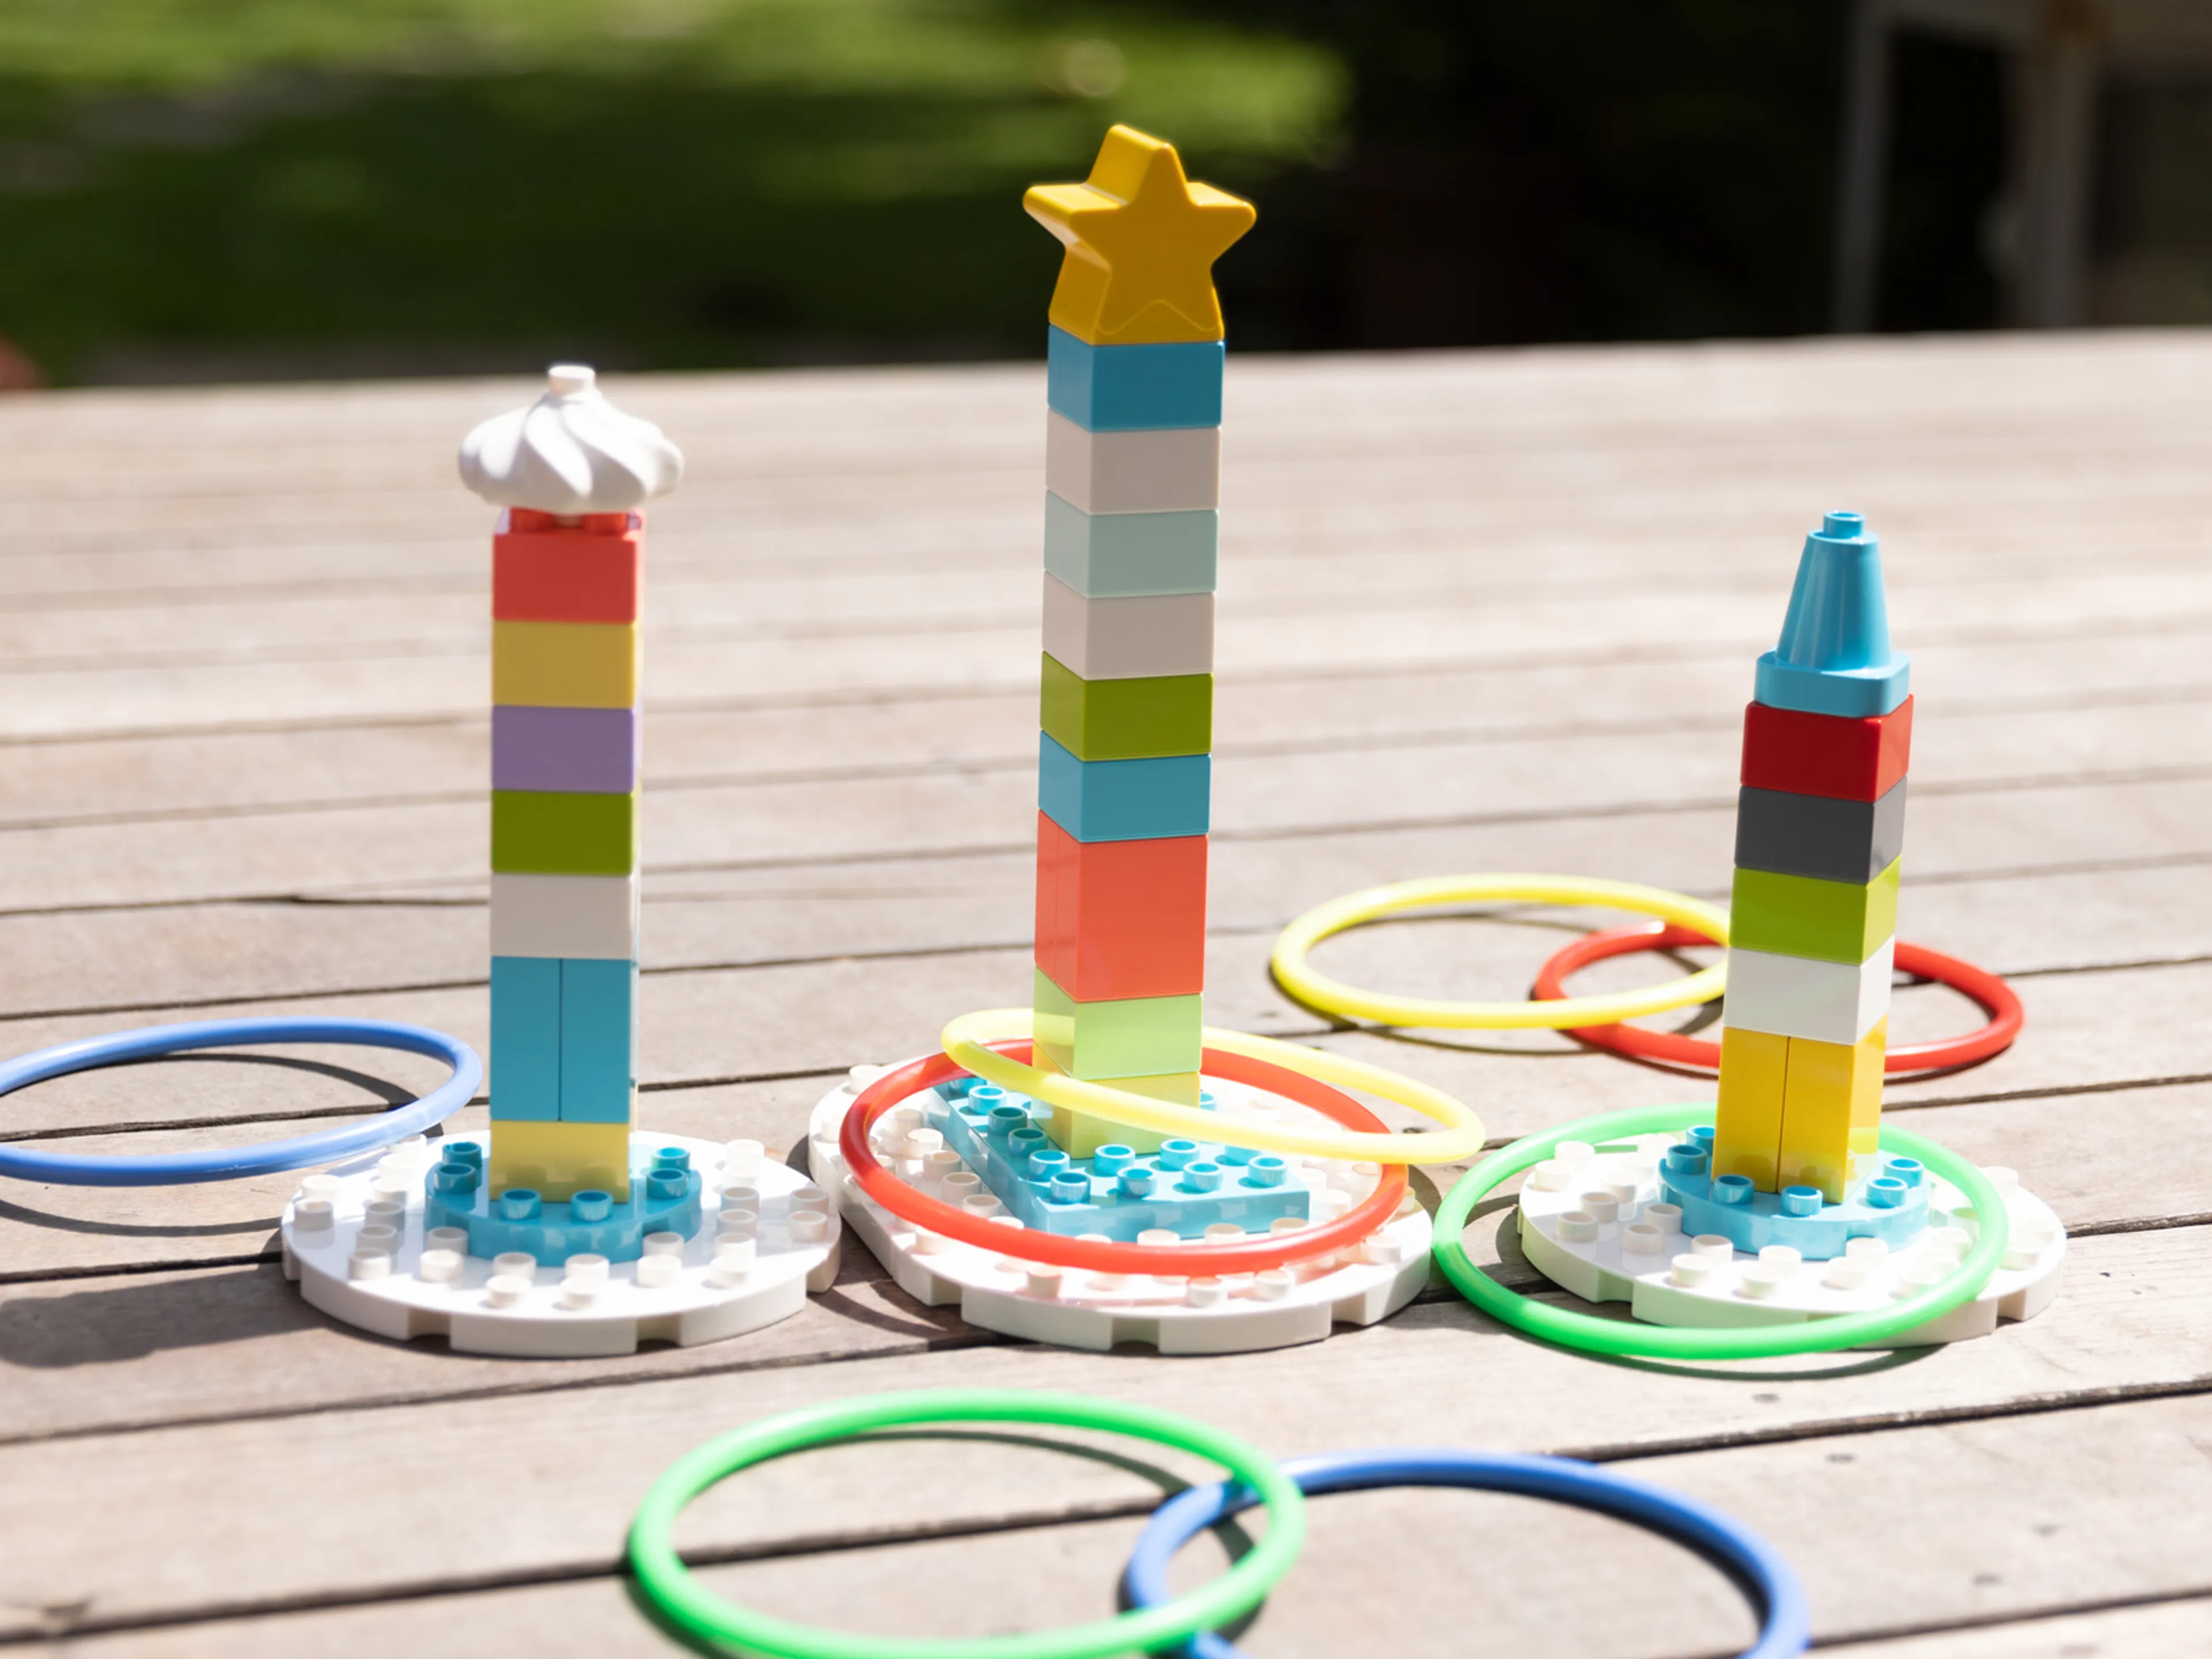 LEGO DUPLO ring toss game